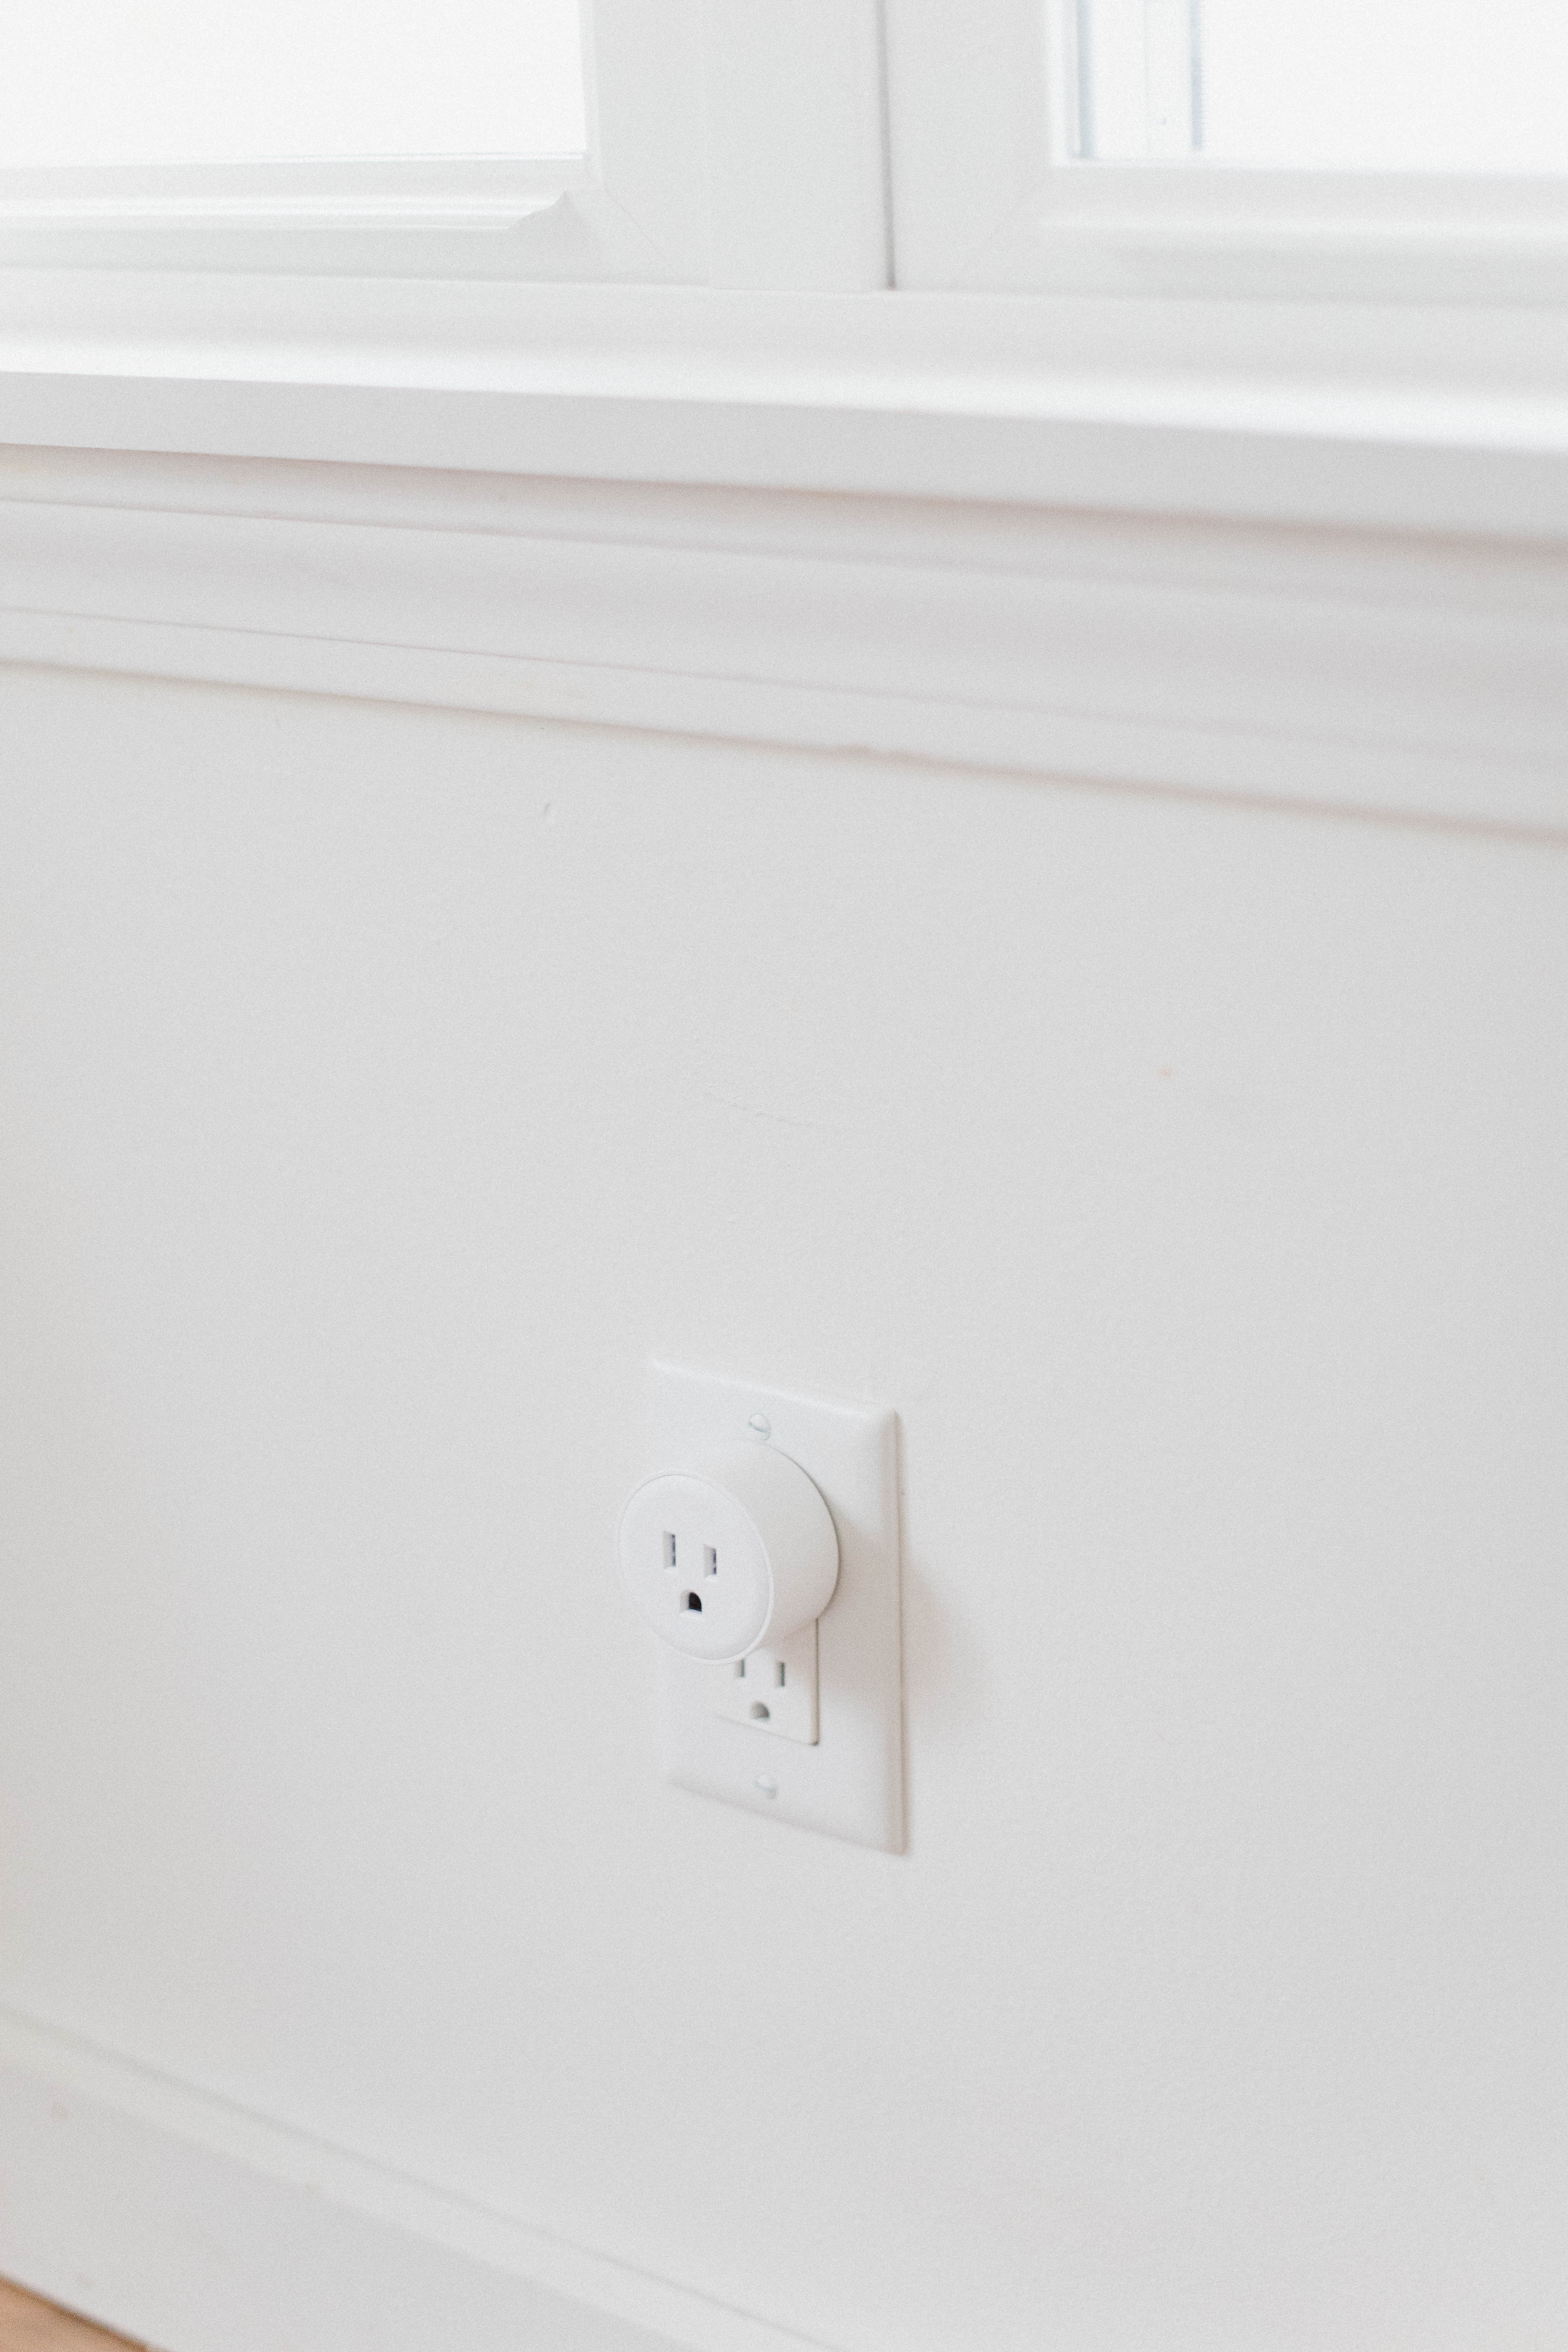 Connecticut life and style blogger Lauren McBride shares The Best Smart Home Devices for your Home, including Amazon Echo, Ring Doorbell, and more.